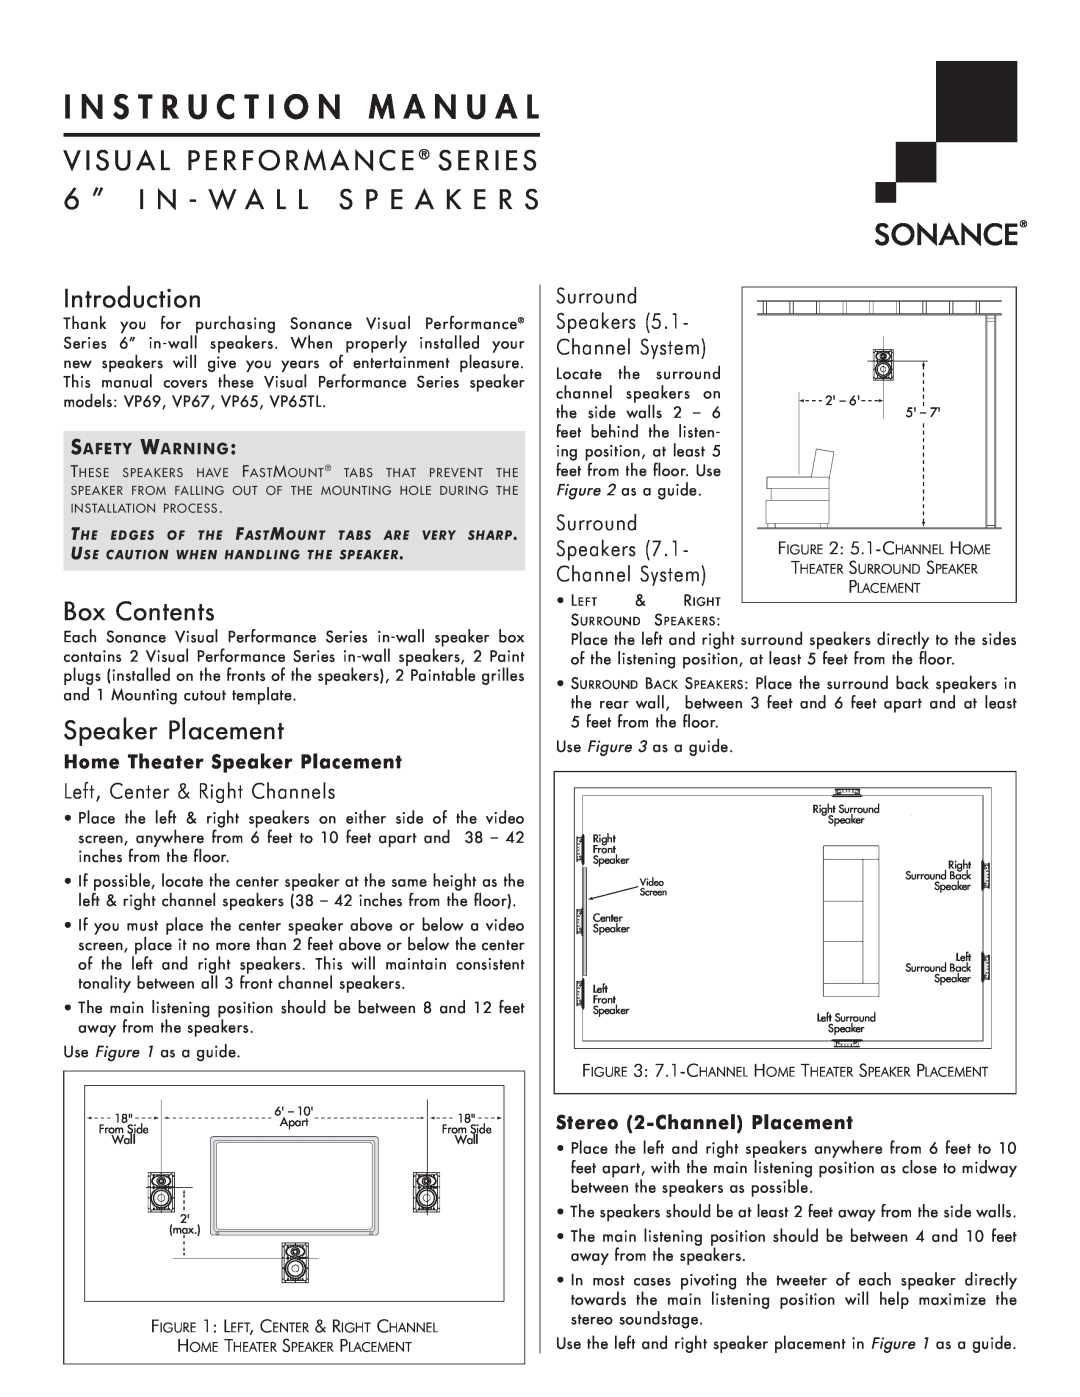 Sonance VP65 TL instruction manual Introduction, Box Contents, Speaker Placement, Left, Center & Right Channels, Surround 